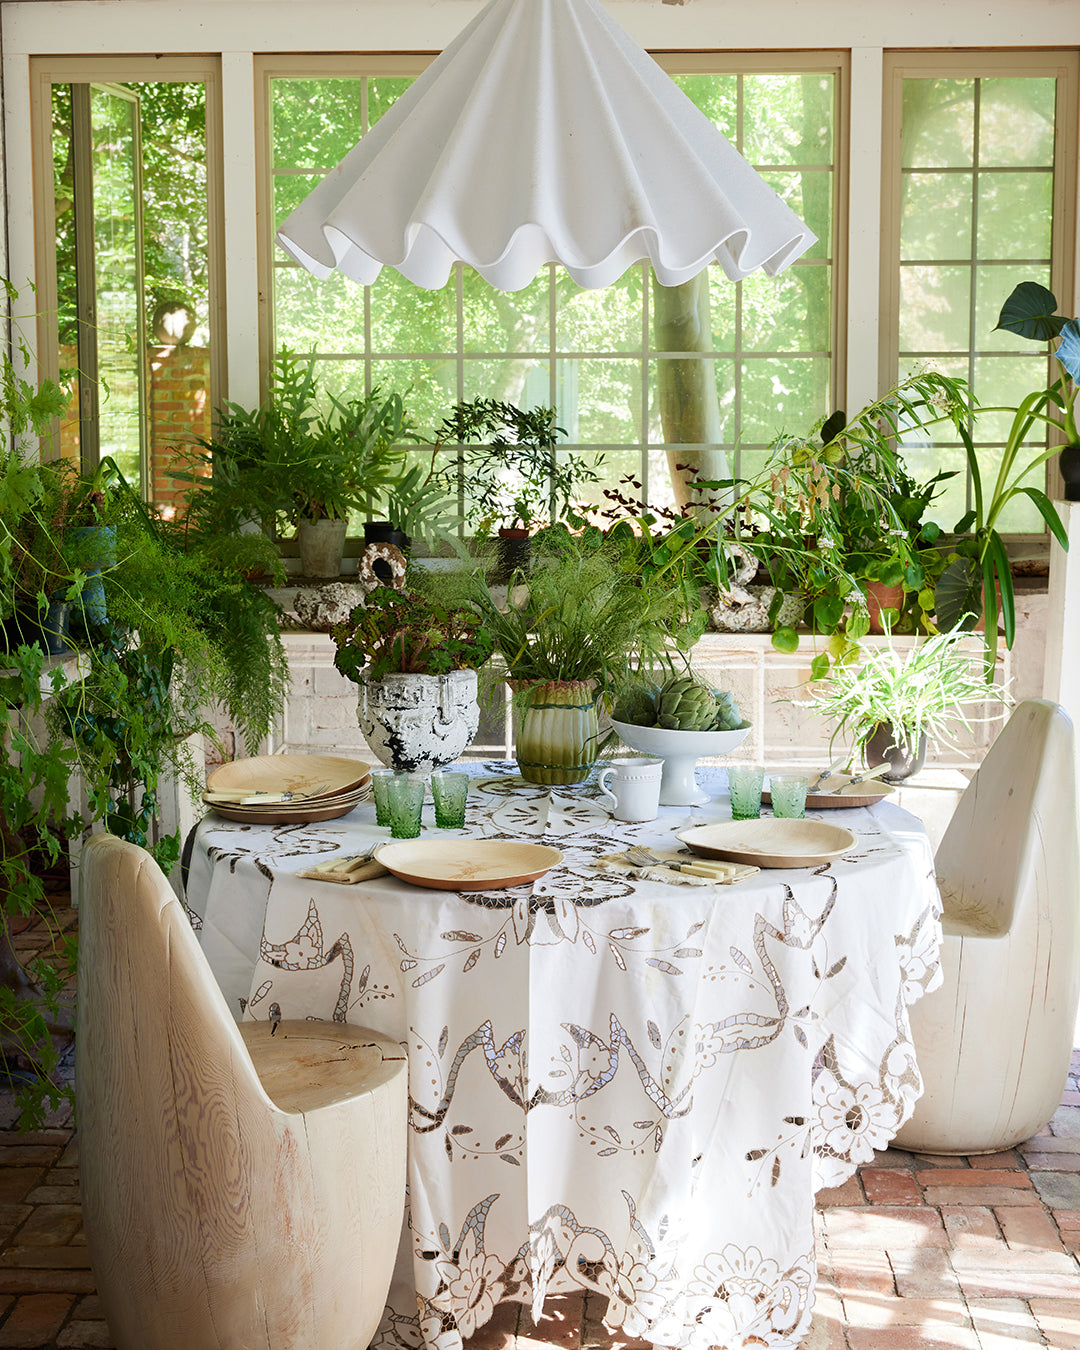 maaterra compostable palm leaf plates grace a table on beautiful enclosed porch.